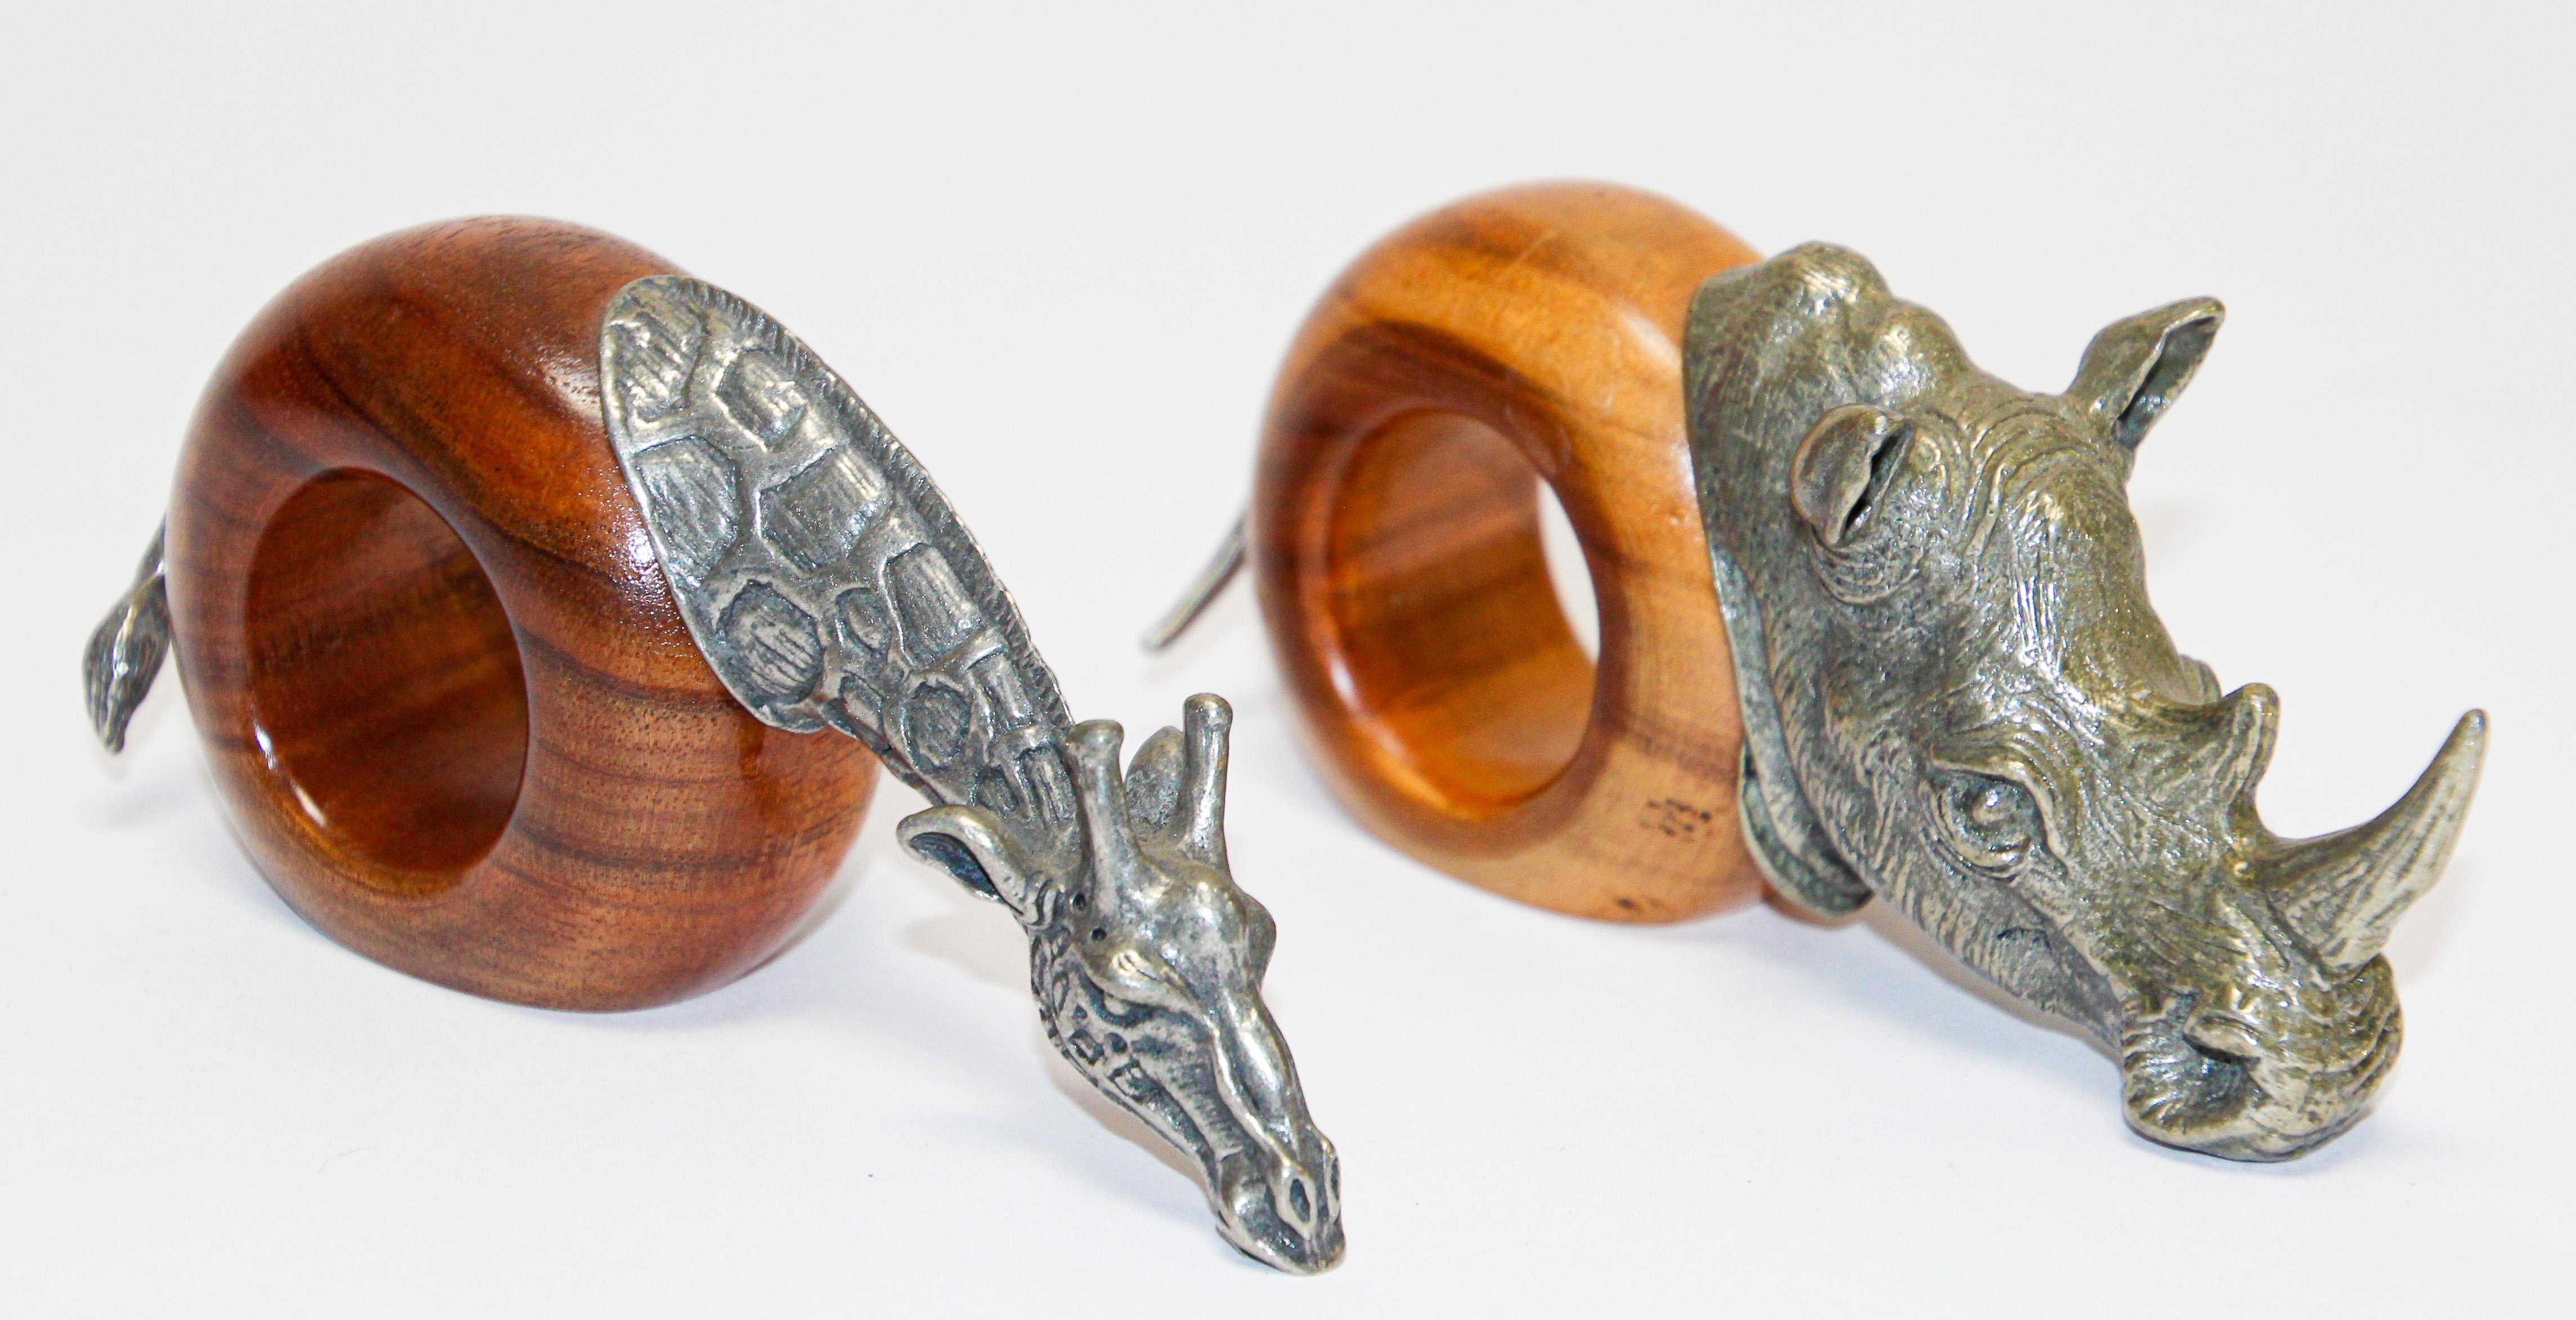 African Safari figural napkin rings.
The Rhino and Giraffe napkin rings are an elegant way to adorn your table with the spirit and image of the natural wonders of Africa.
These elegant napkin holders were designed in South Africa by Paul Gibbs and